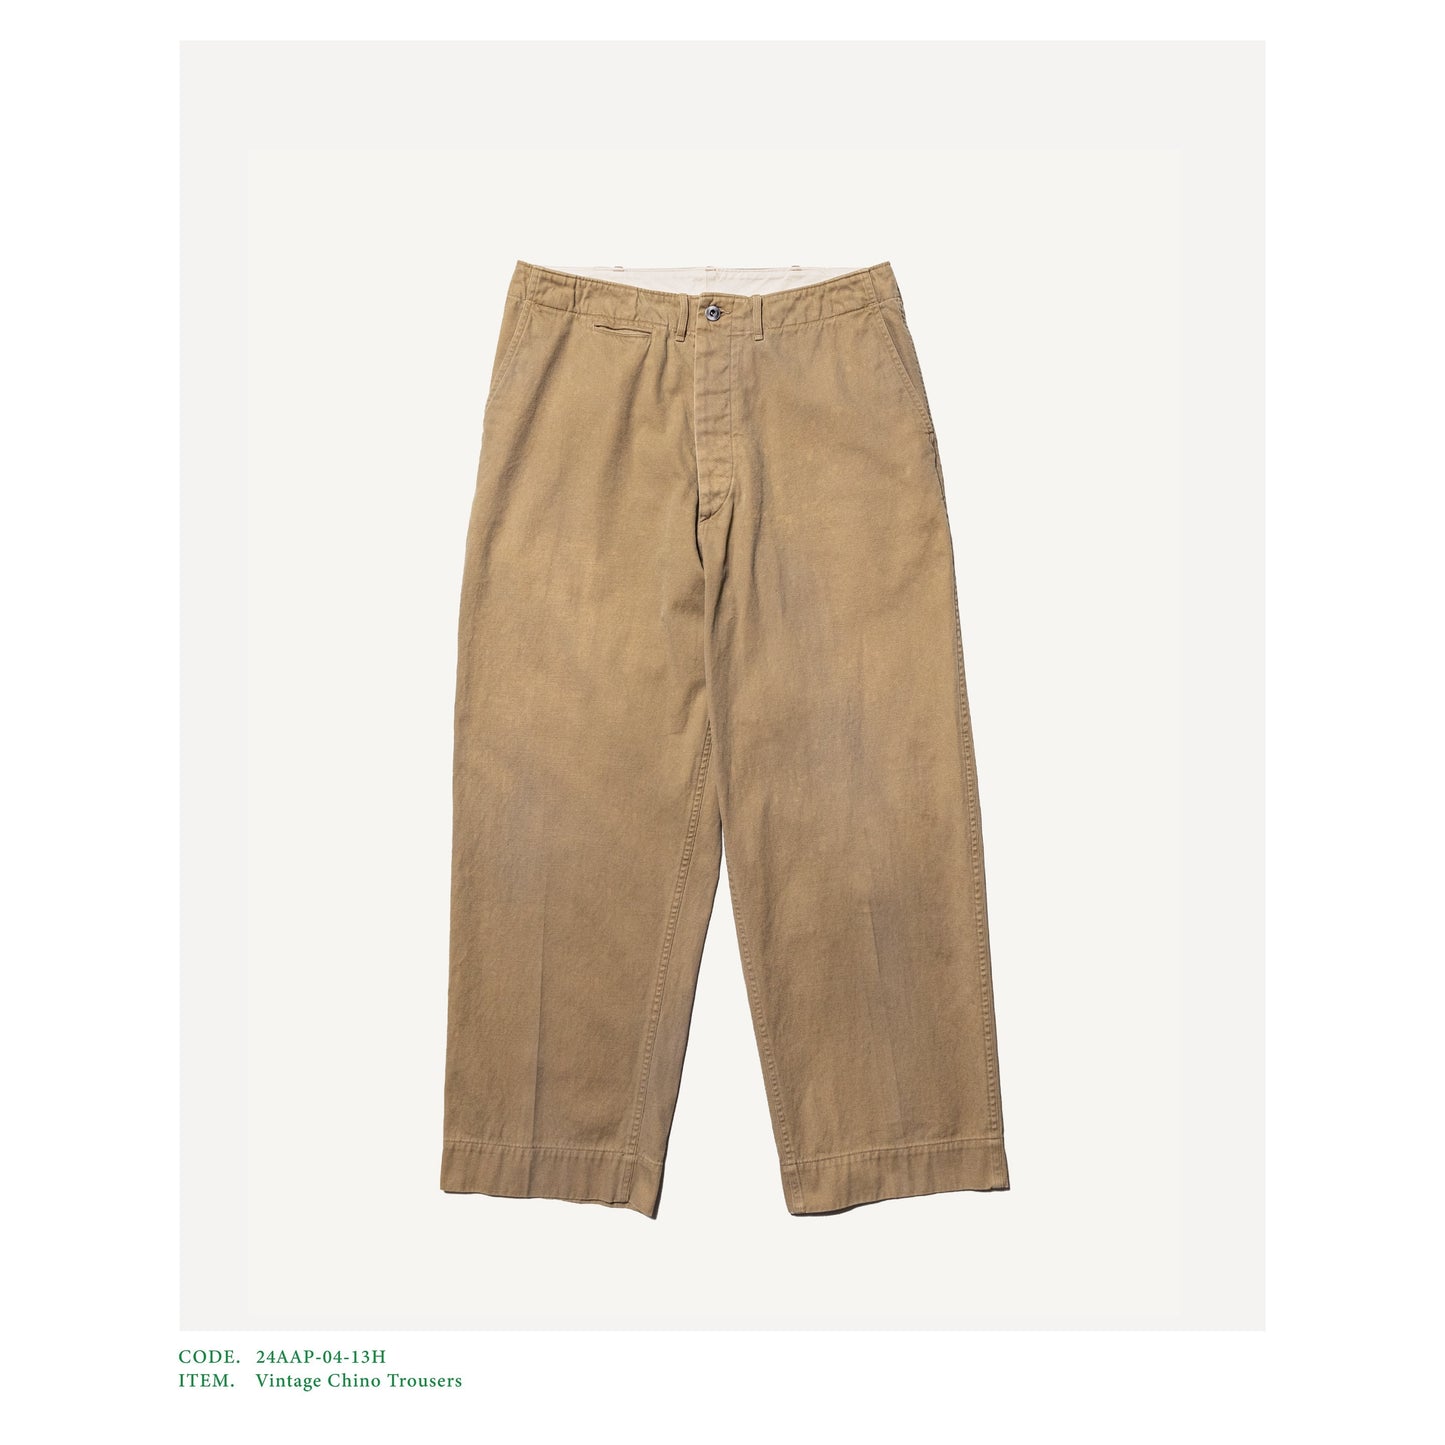 A.PRESSE 24AW Vintage Chino Trousers